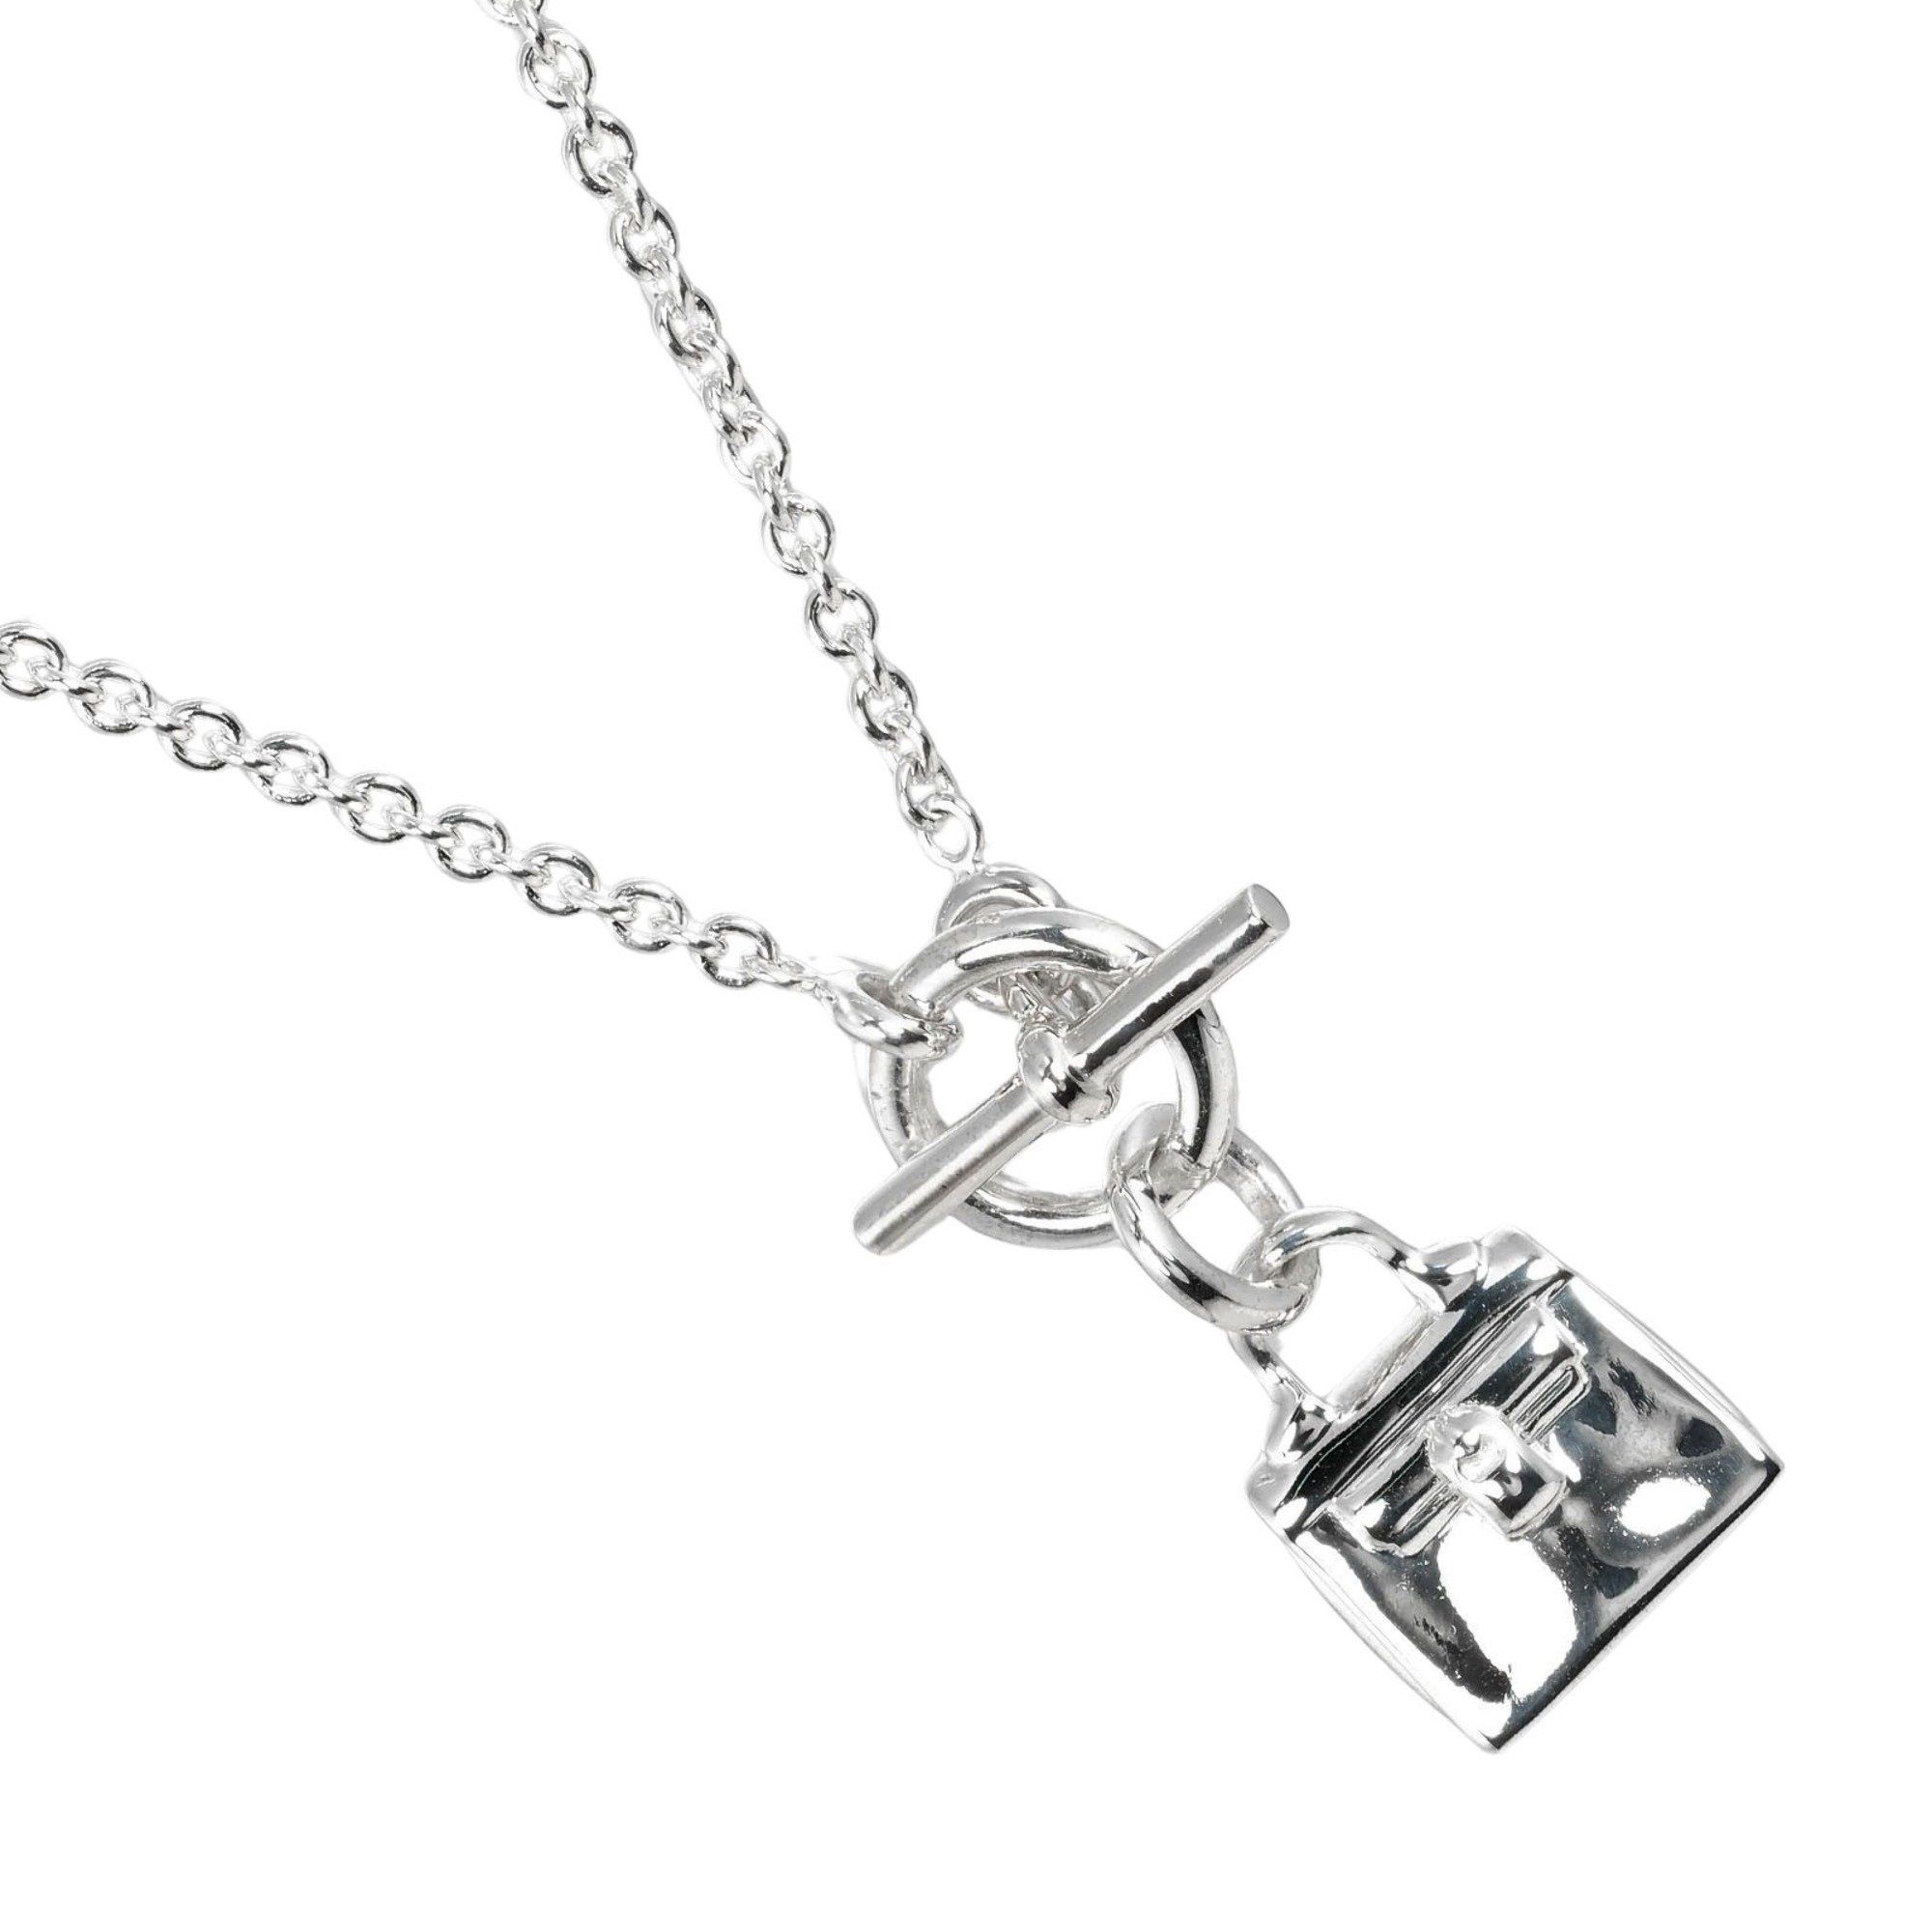 image of Hermes Amulet Kelly Necklace Silver 925 Approx. 12.5G T121724516, Women's